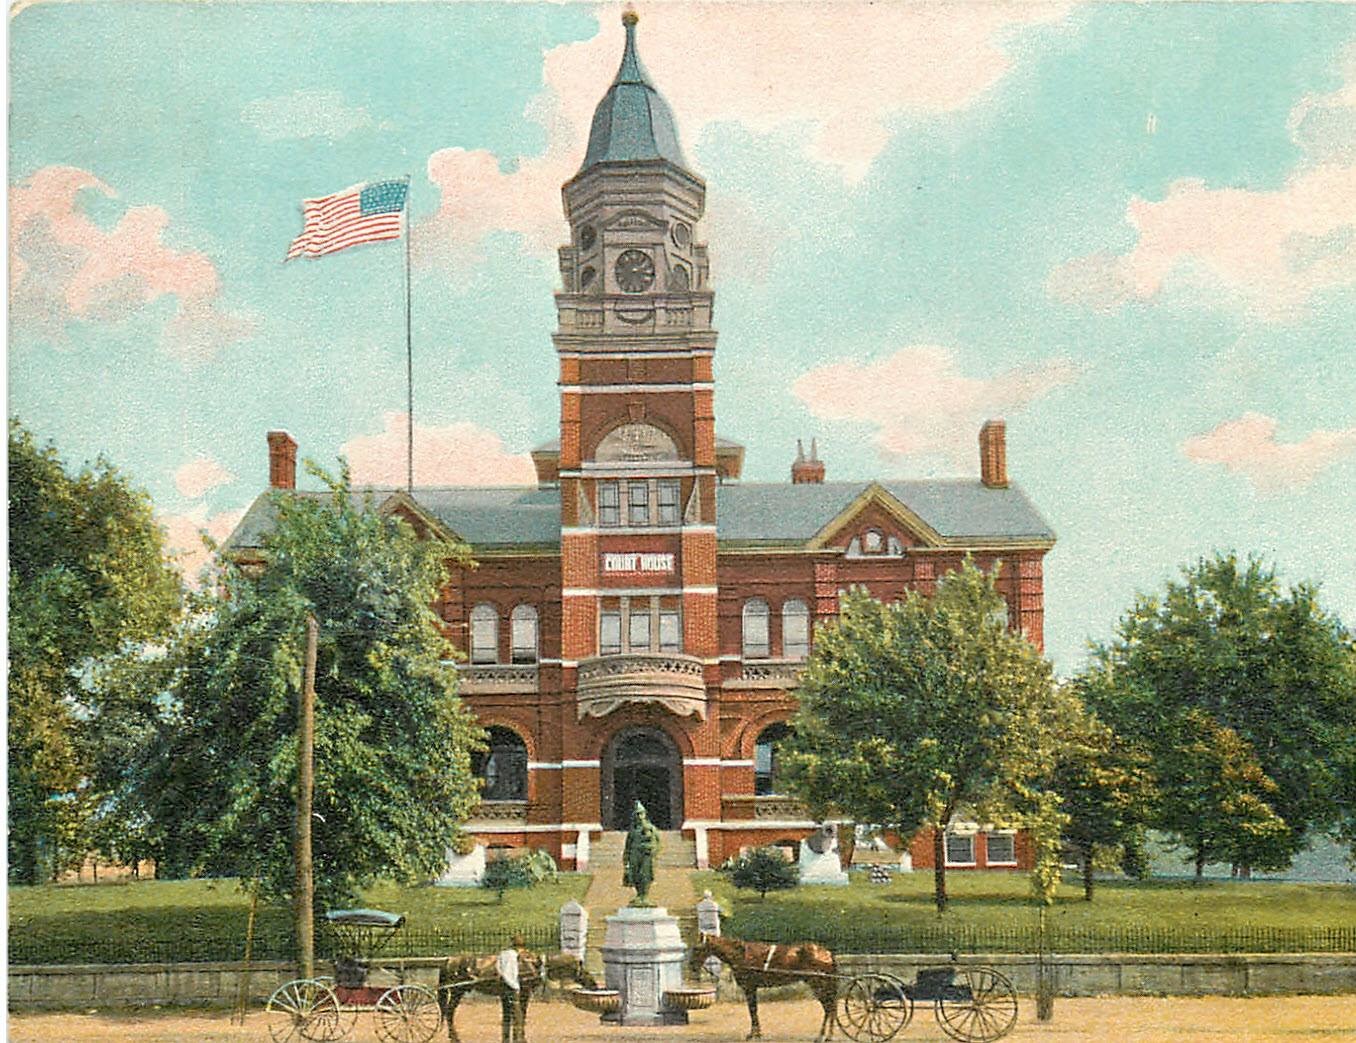 The Knox County Courthouse